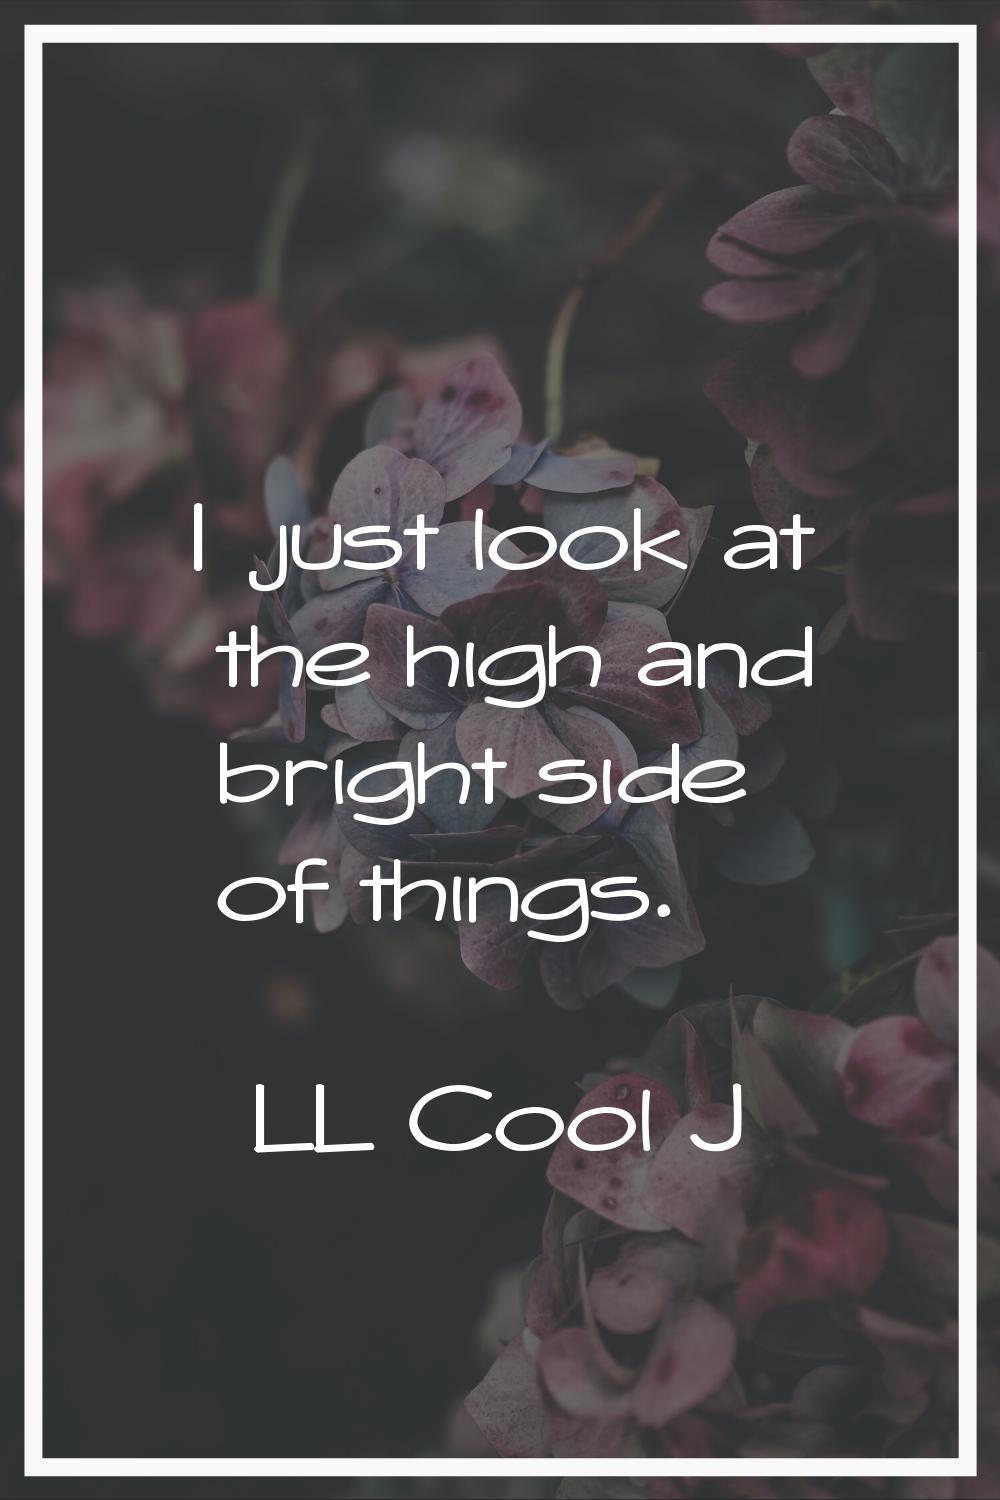 I just look at the high and bright side of things.